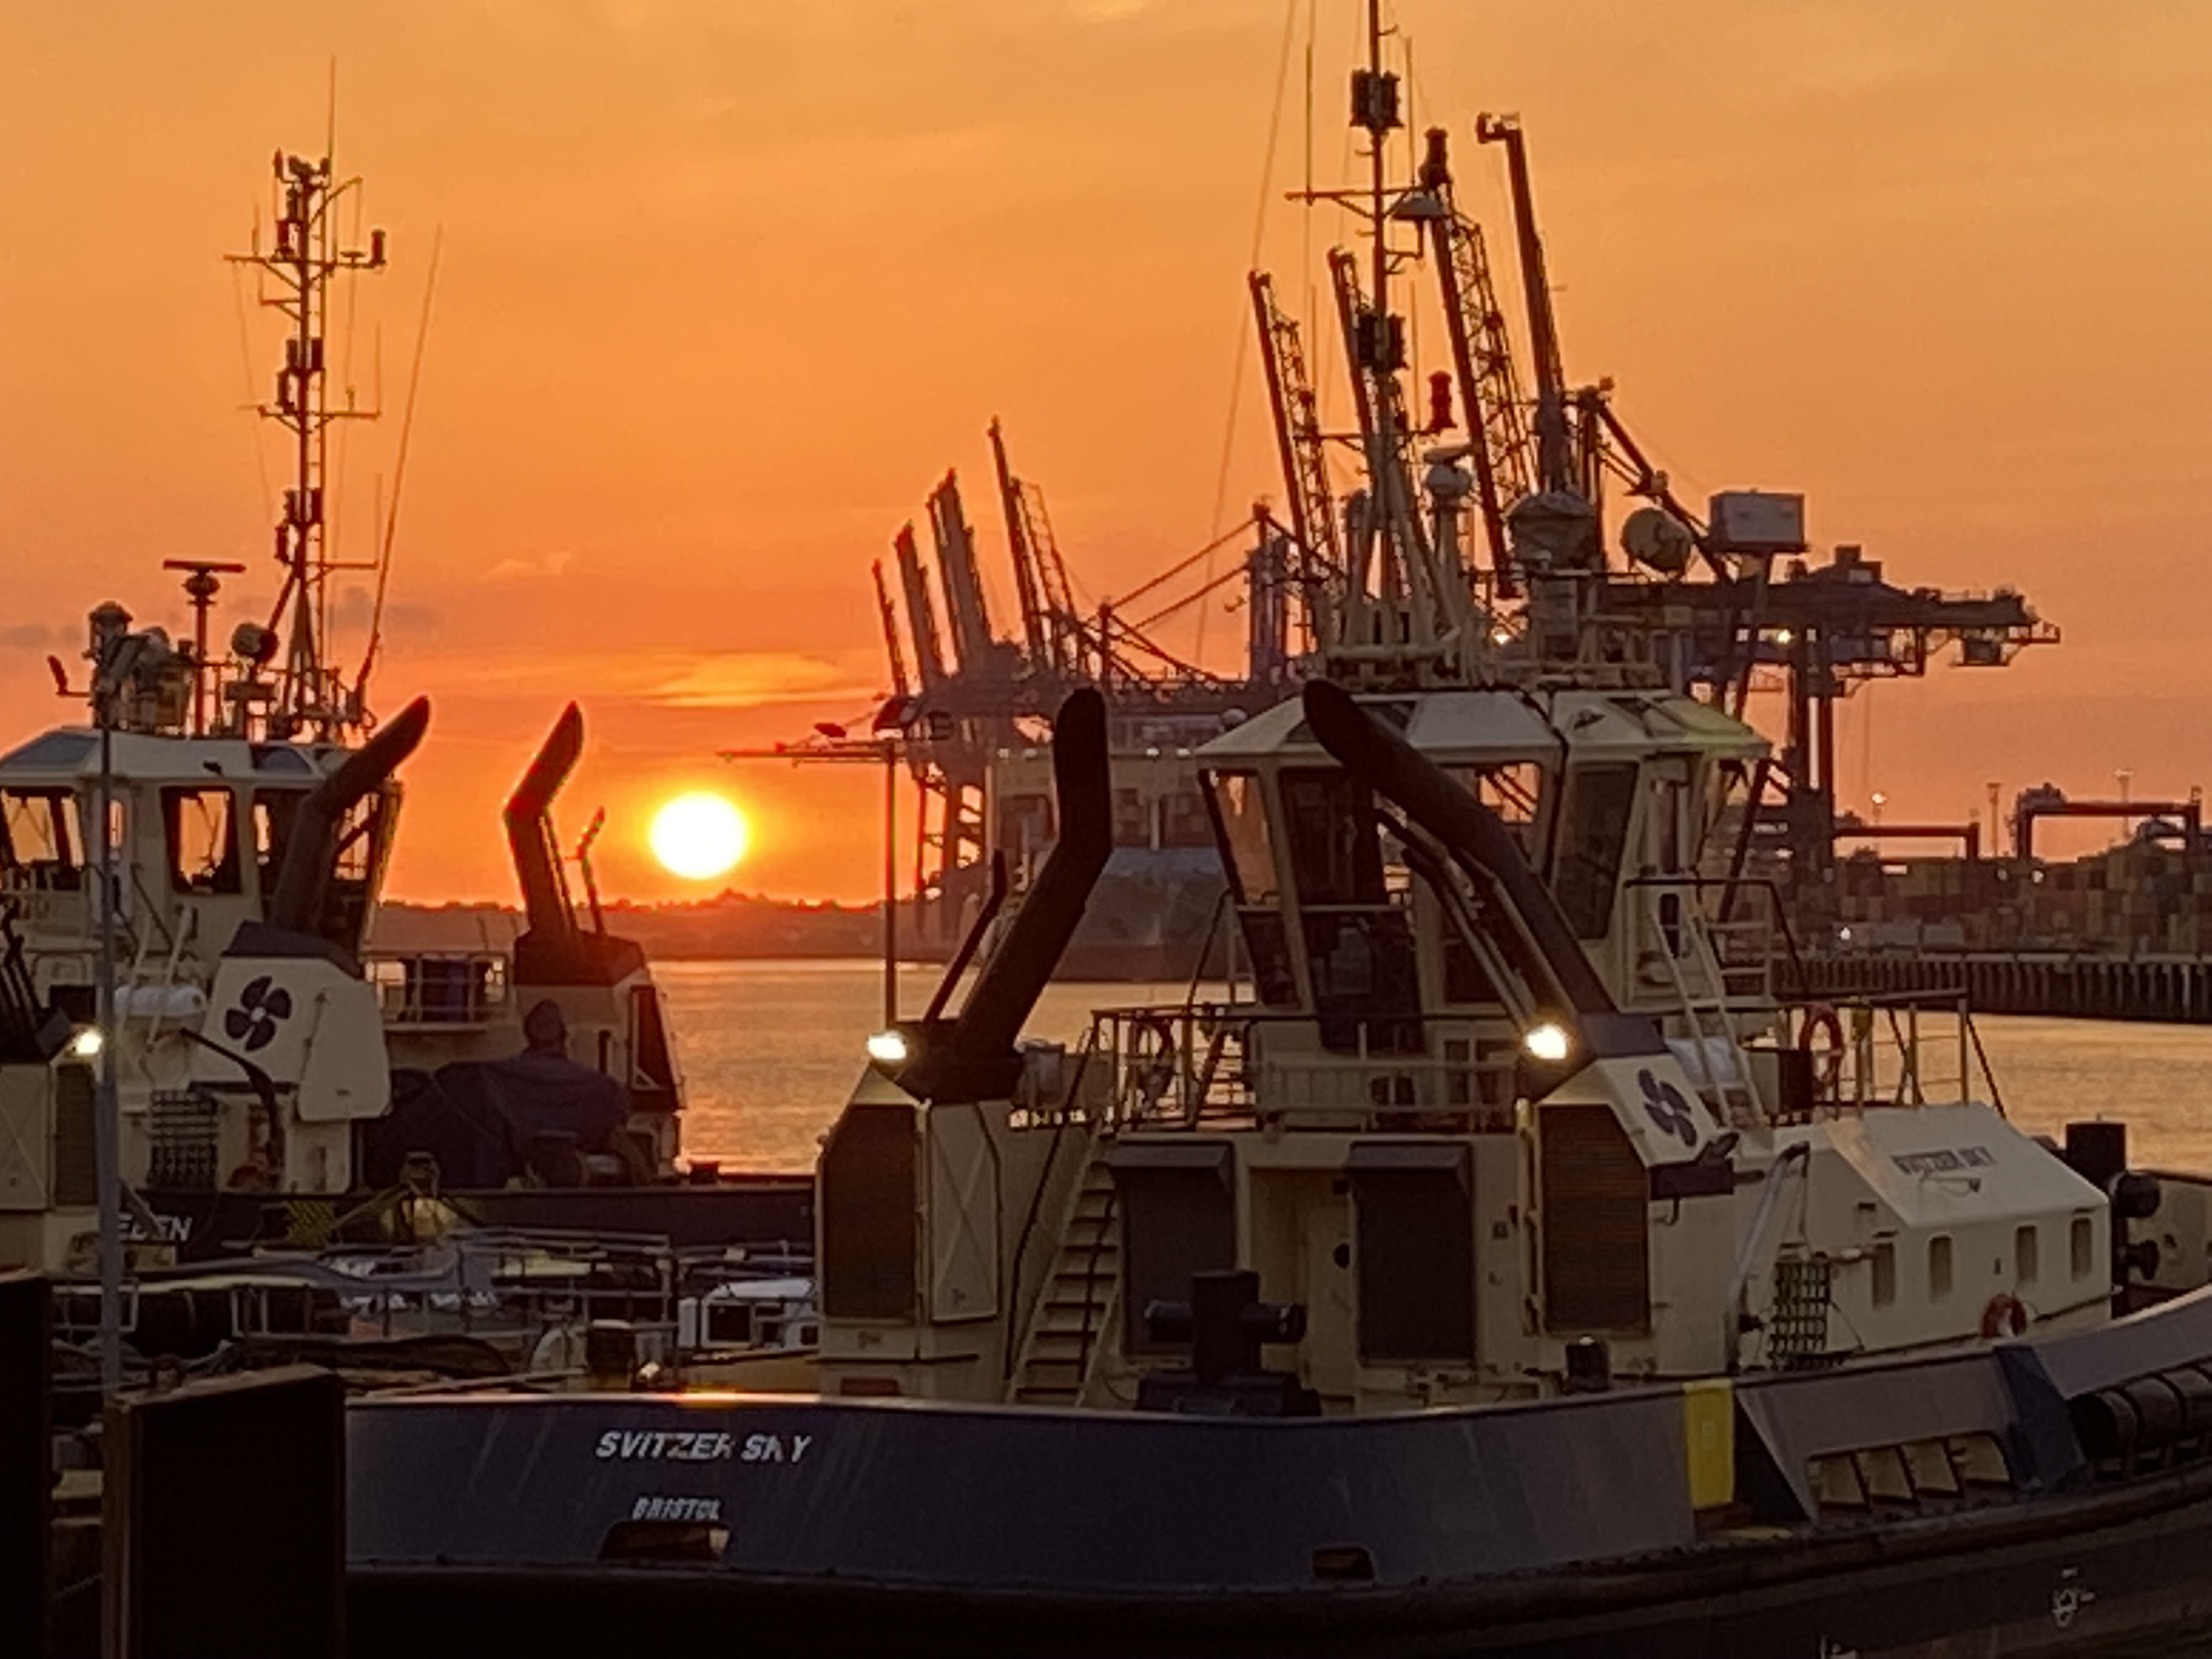 View of boats moored at port in sunset